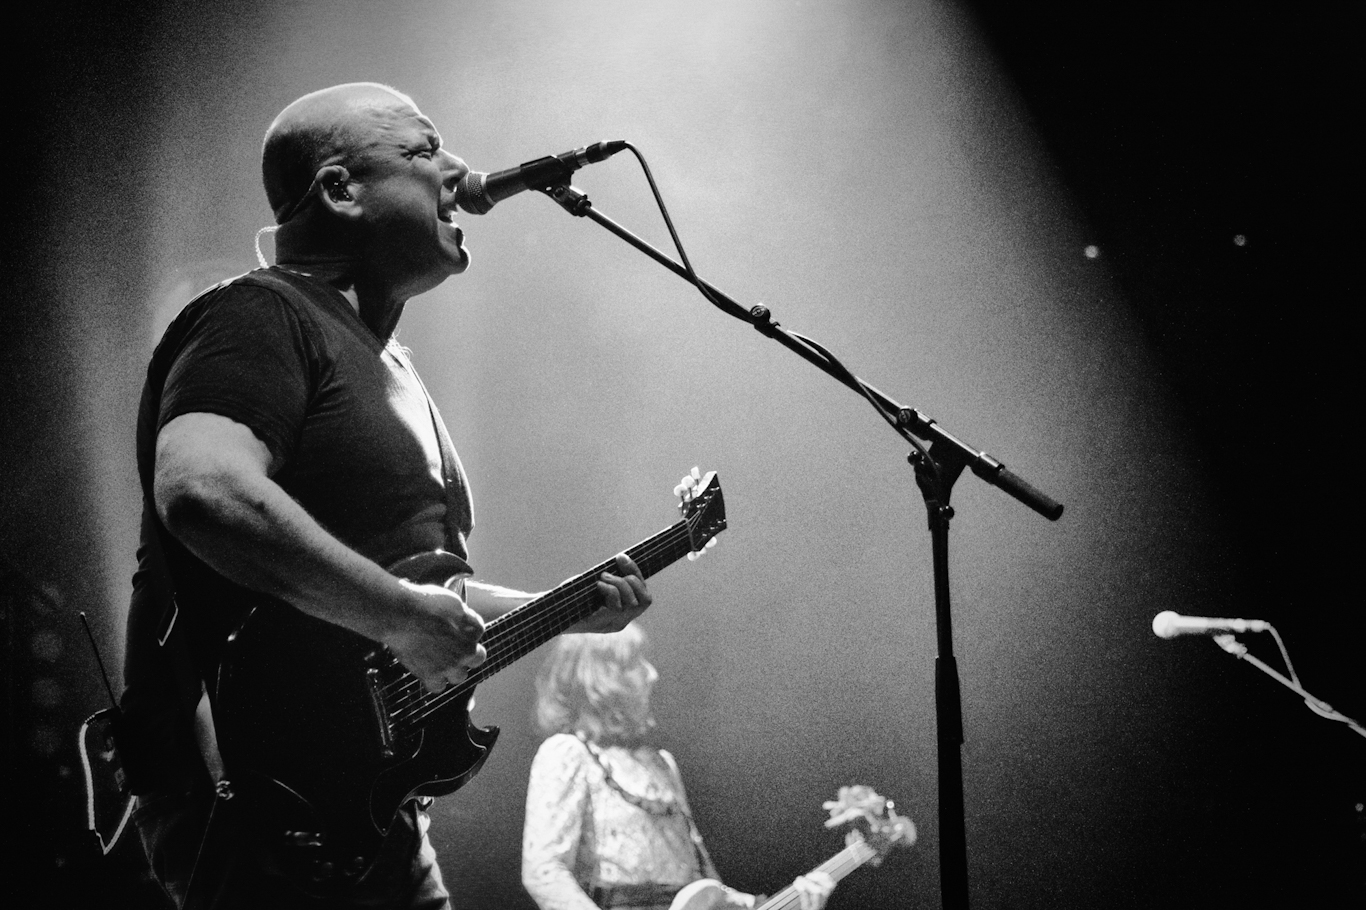 LIVE REVIEW: The Pixies at Camden Roundhouse Credit: Denise Esposito